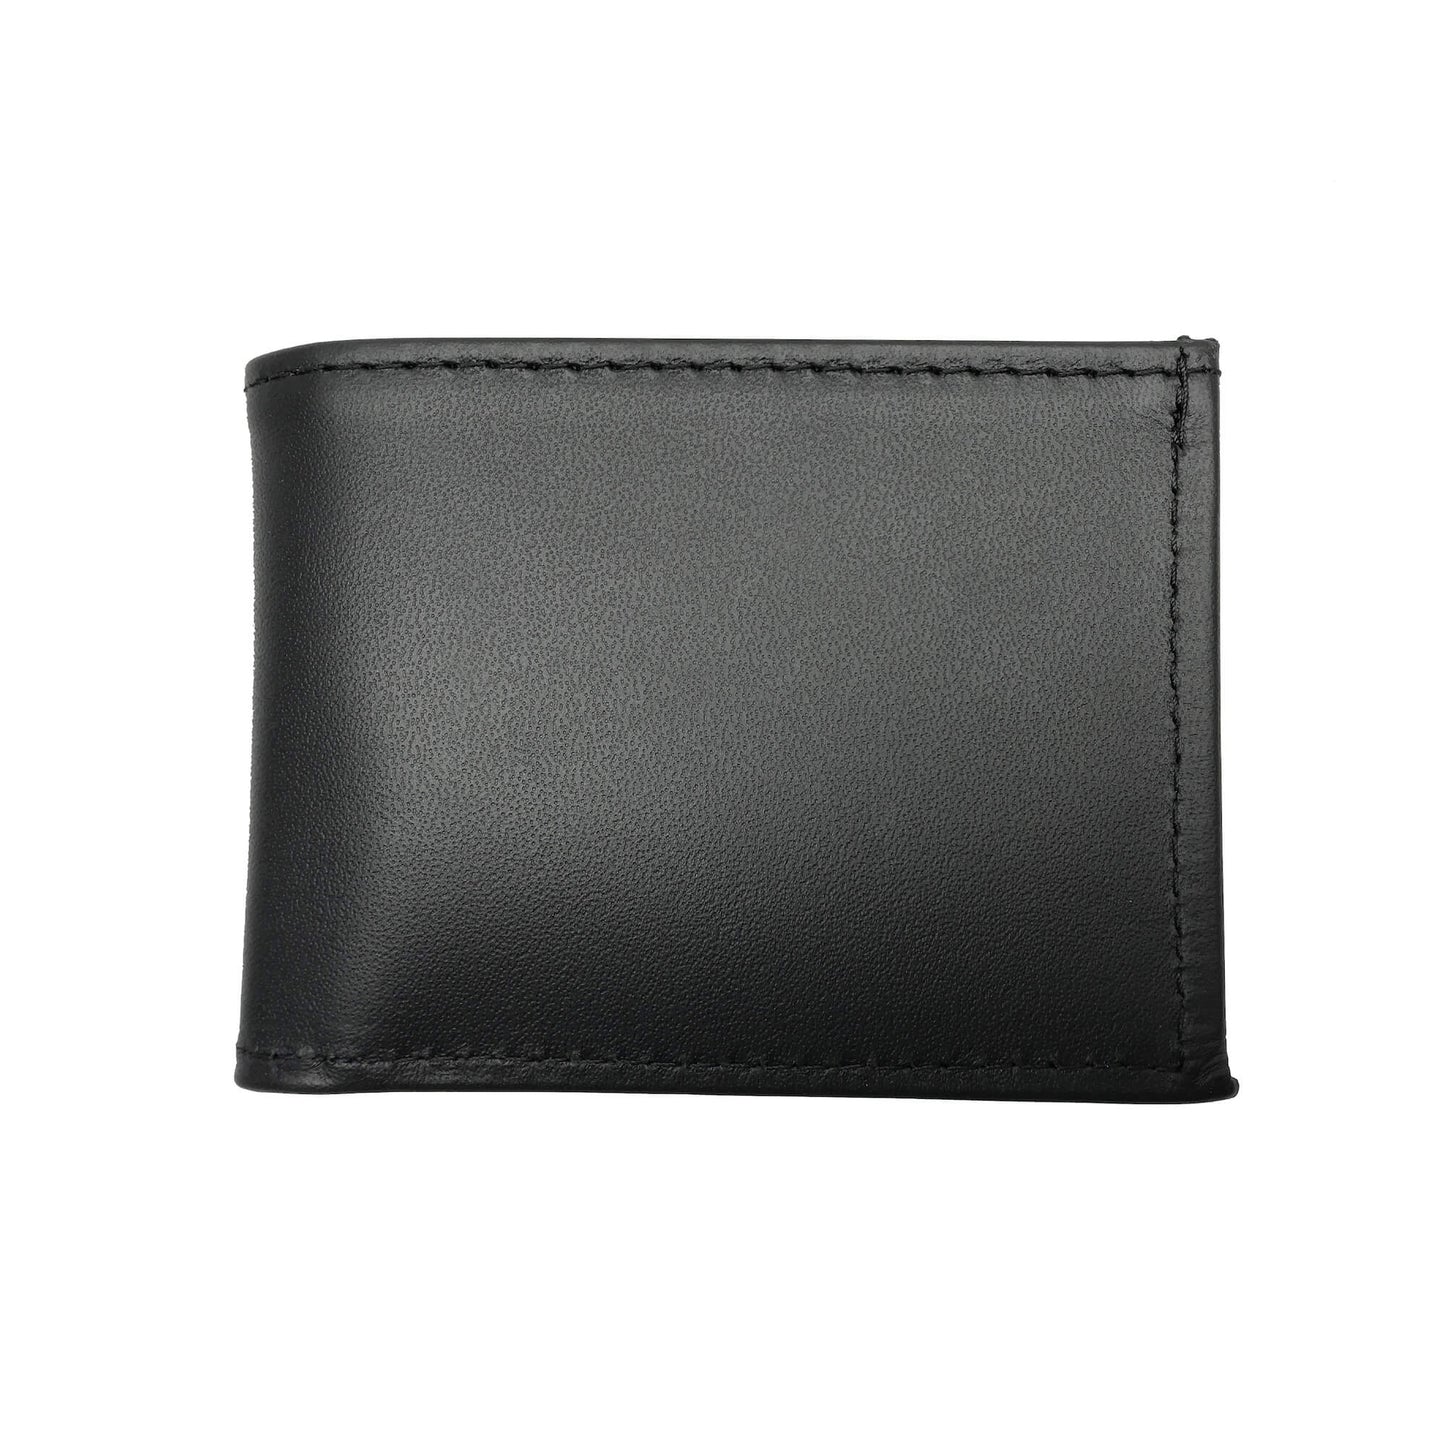 New York State Department of Correction (DOC) Horizontal Bifold Hidden Badge Wallet-Perfect Fit-911 Duty Gear USA